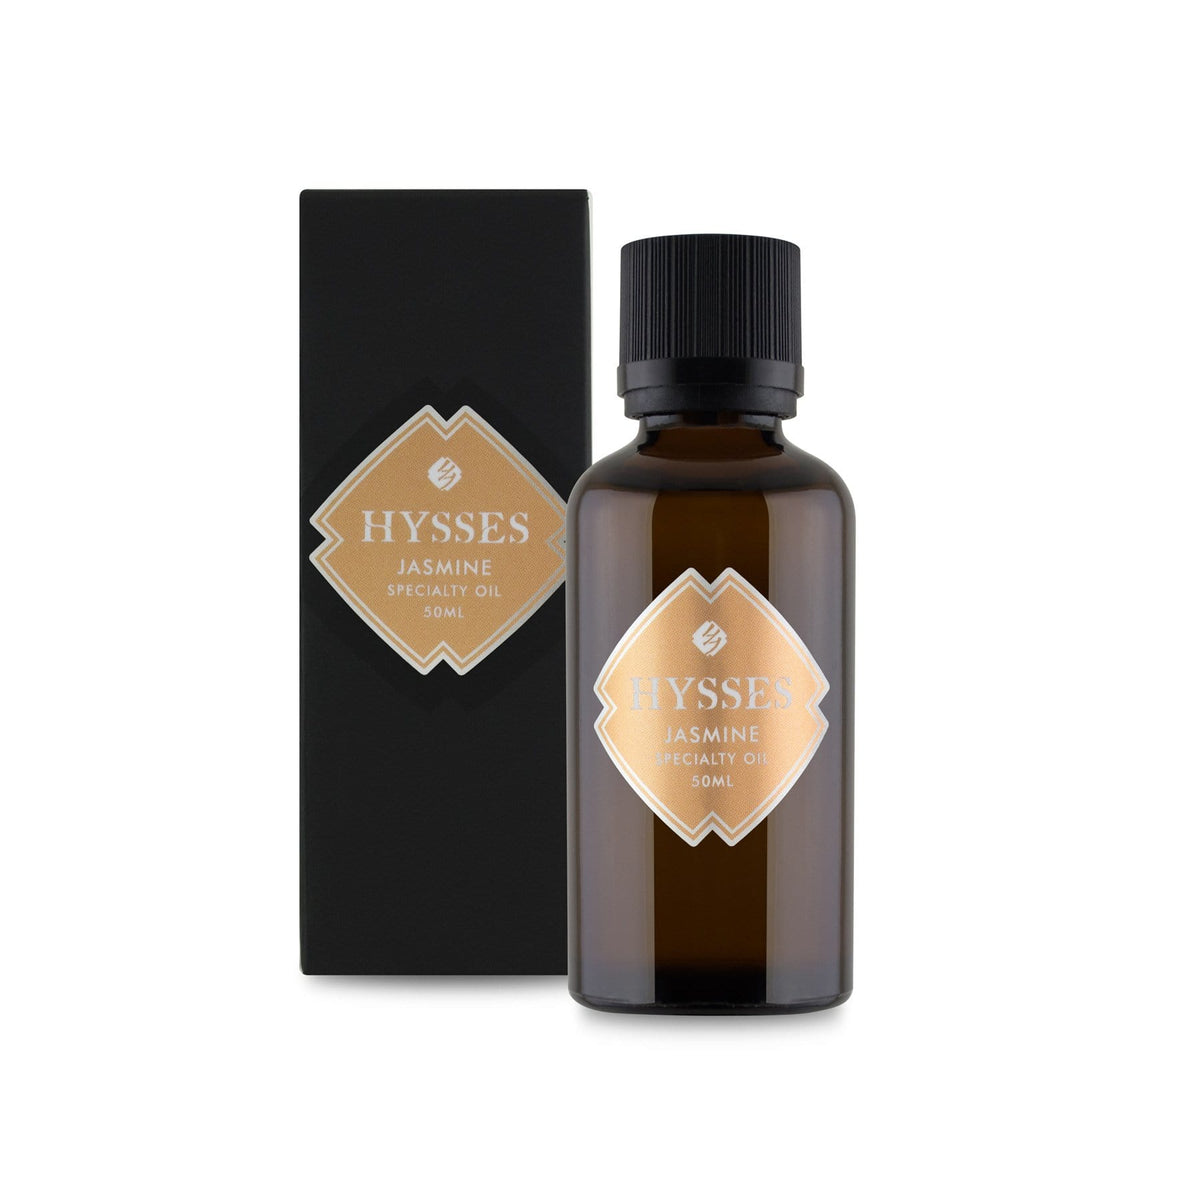 Hysses Essential Oil 50ml Specialty Oil Jasmine Absolute